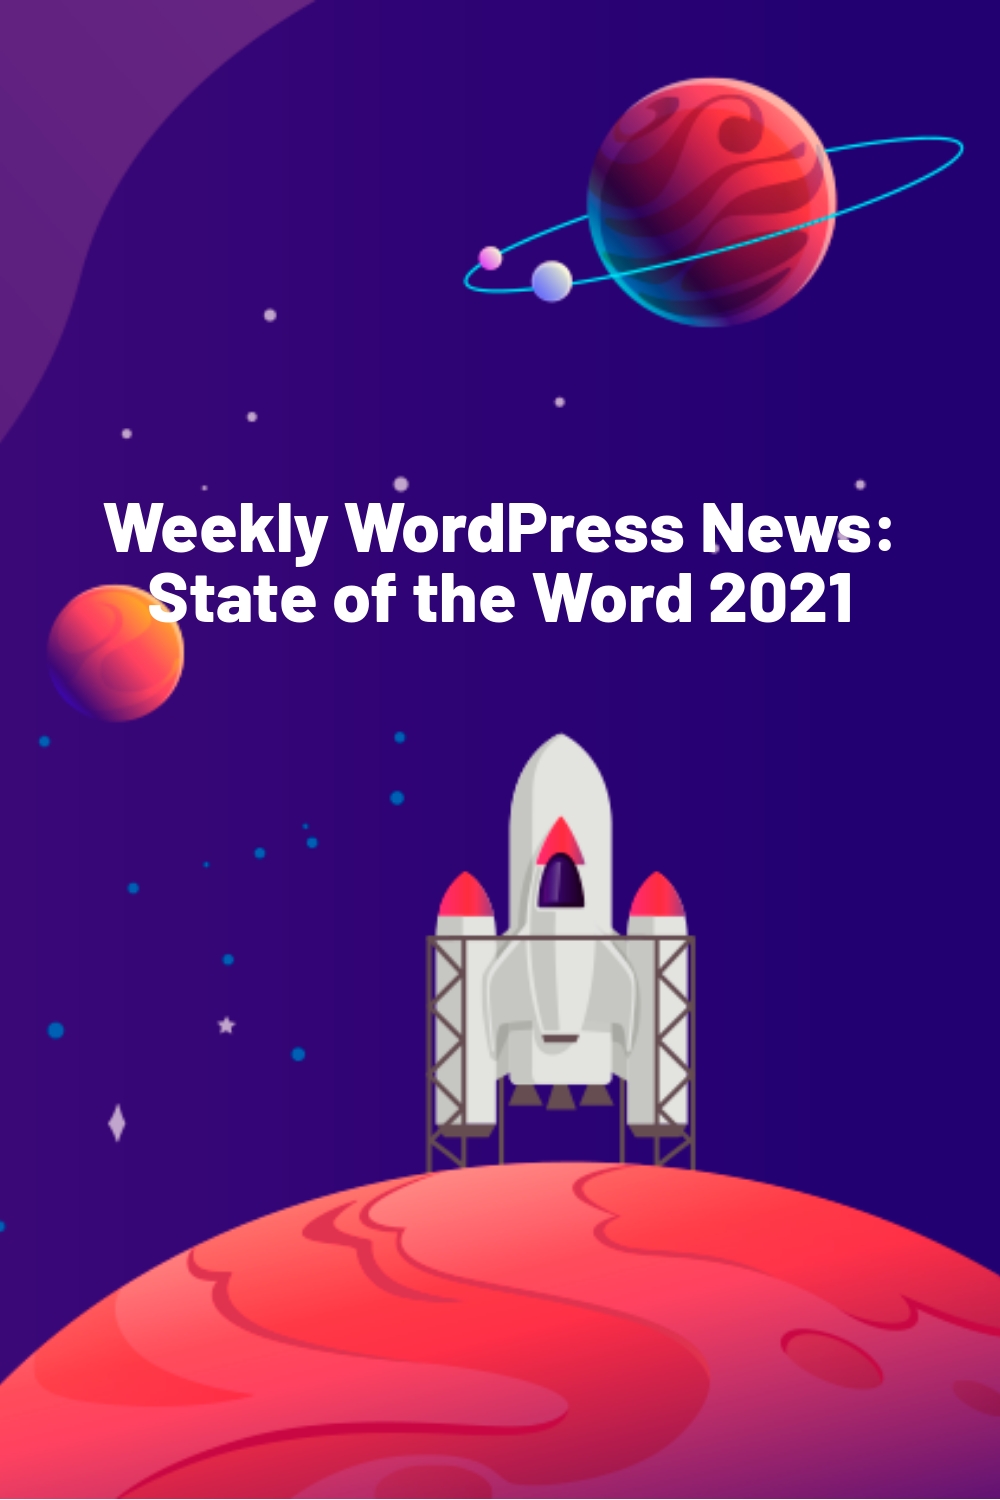 Weekly WordPress News: State of the Word 2021